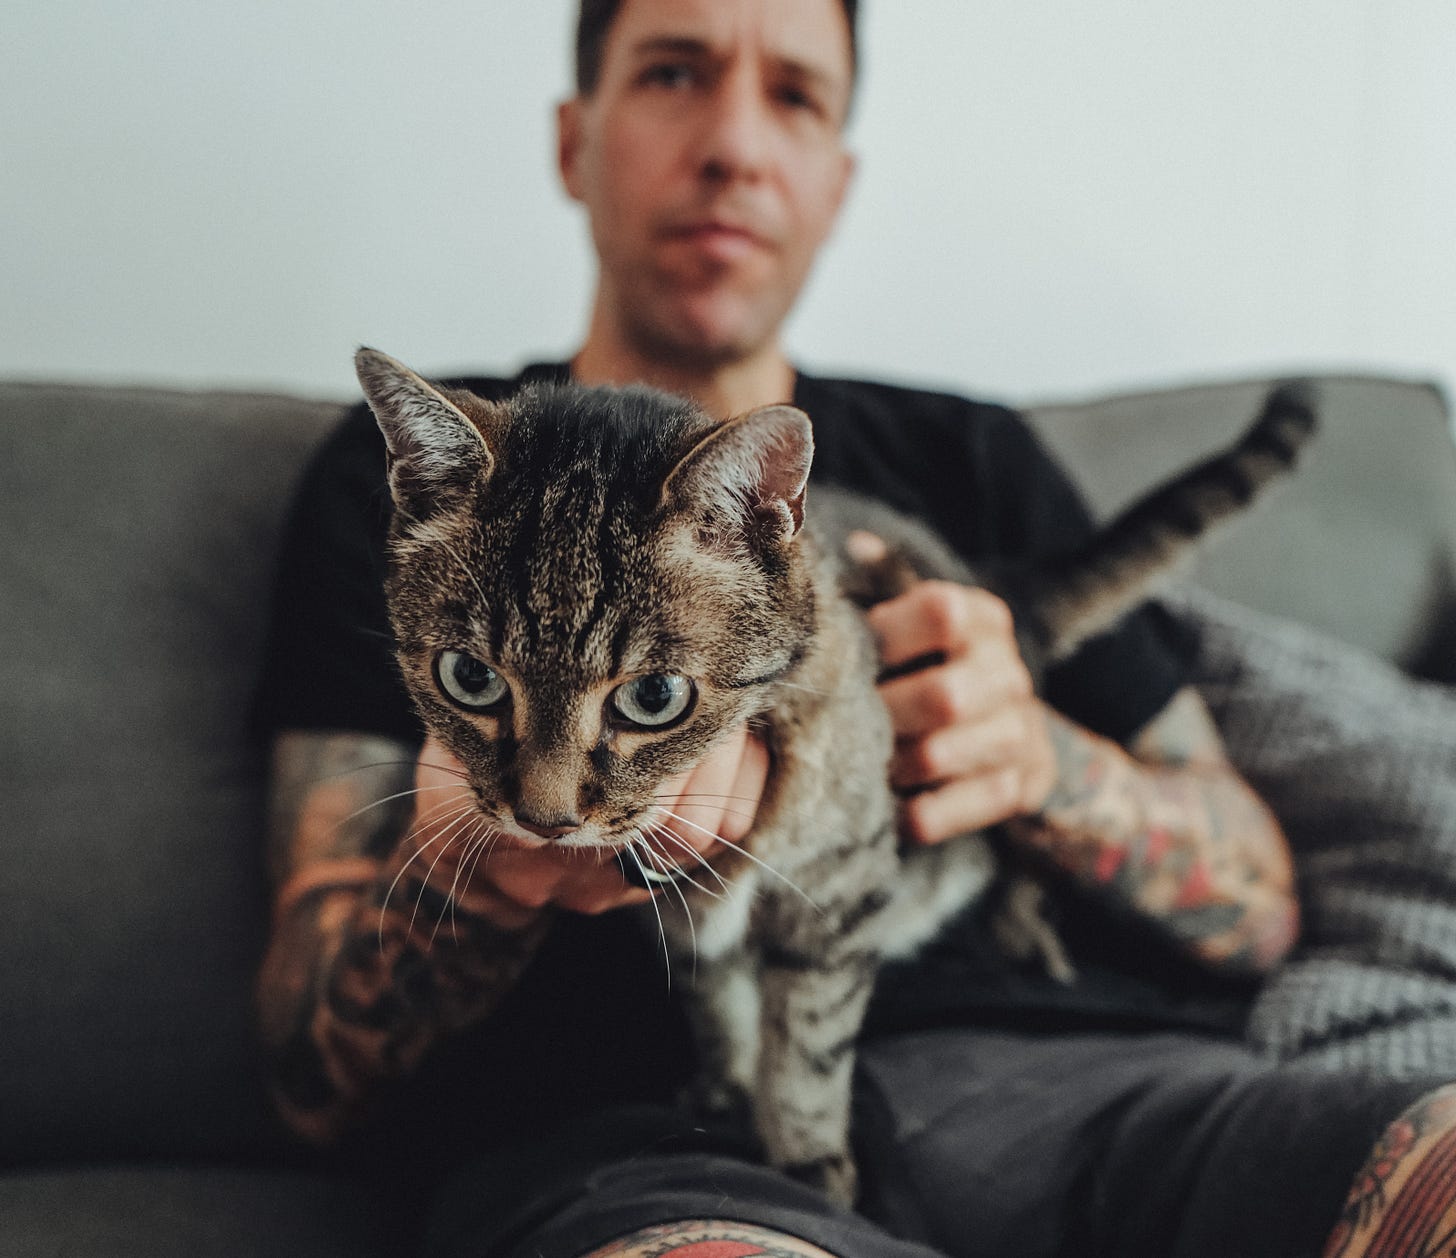 Chris and his cat Harry on a couch